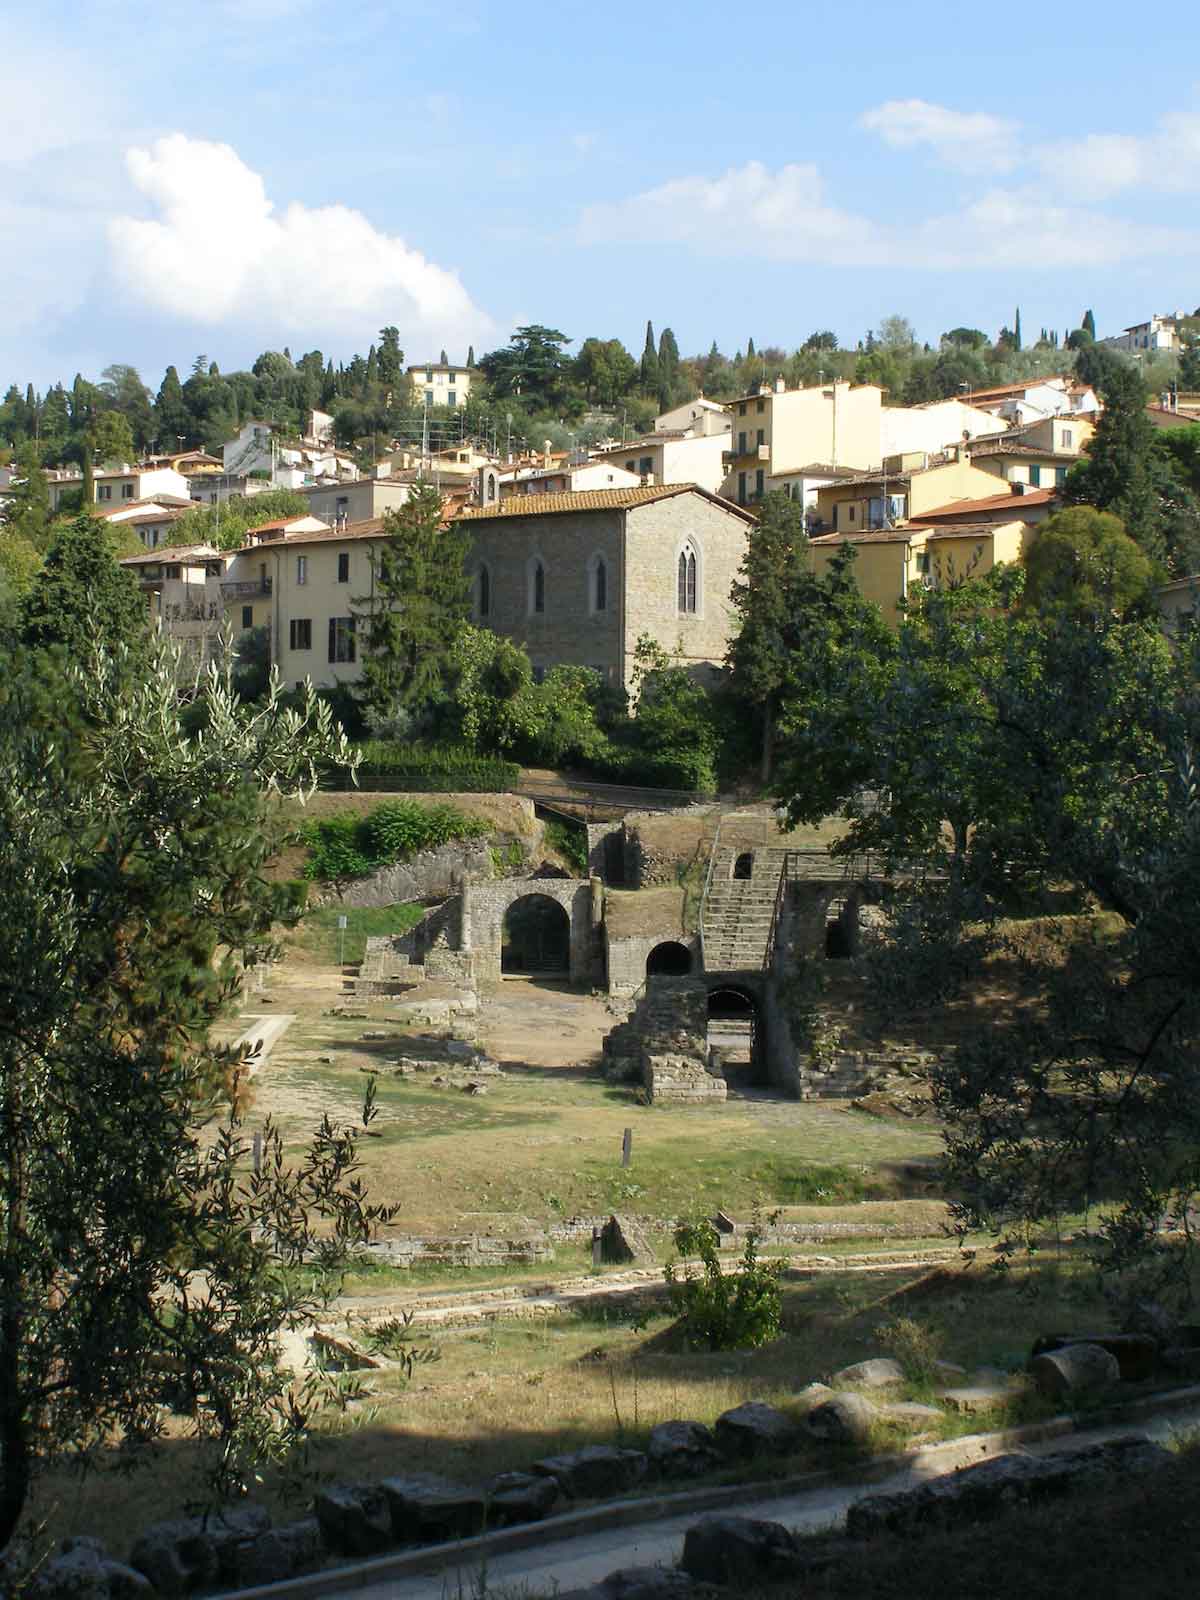 Tuscan town with ancient ruins in the foreground and more modern buildings in the background.